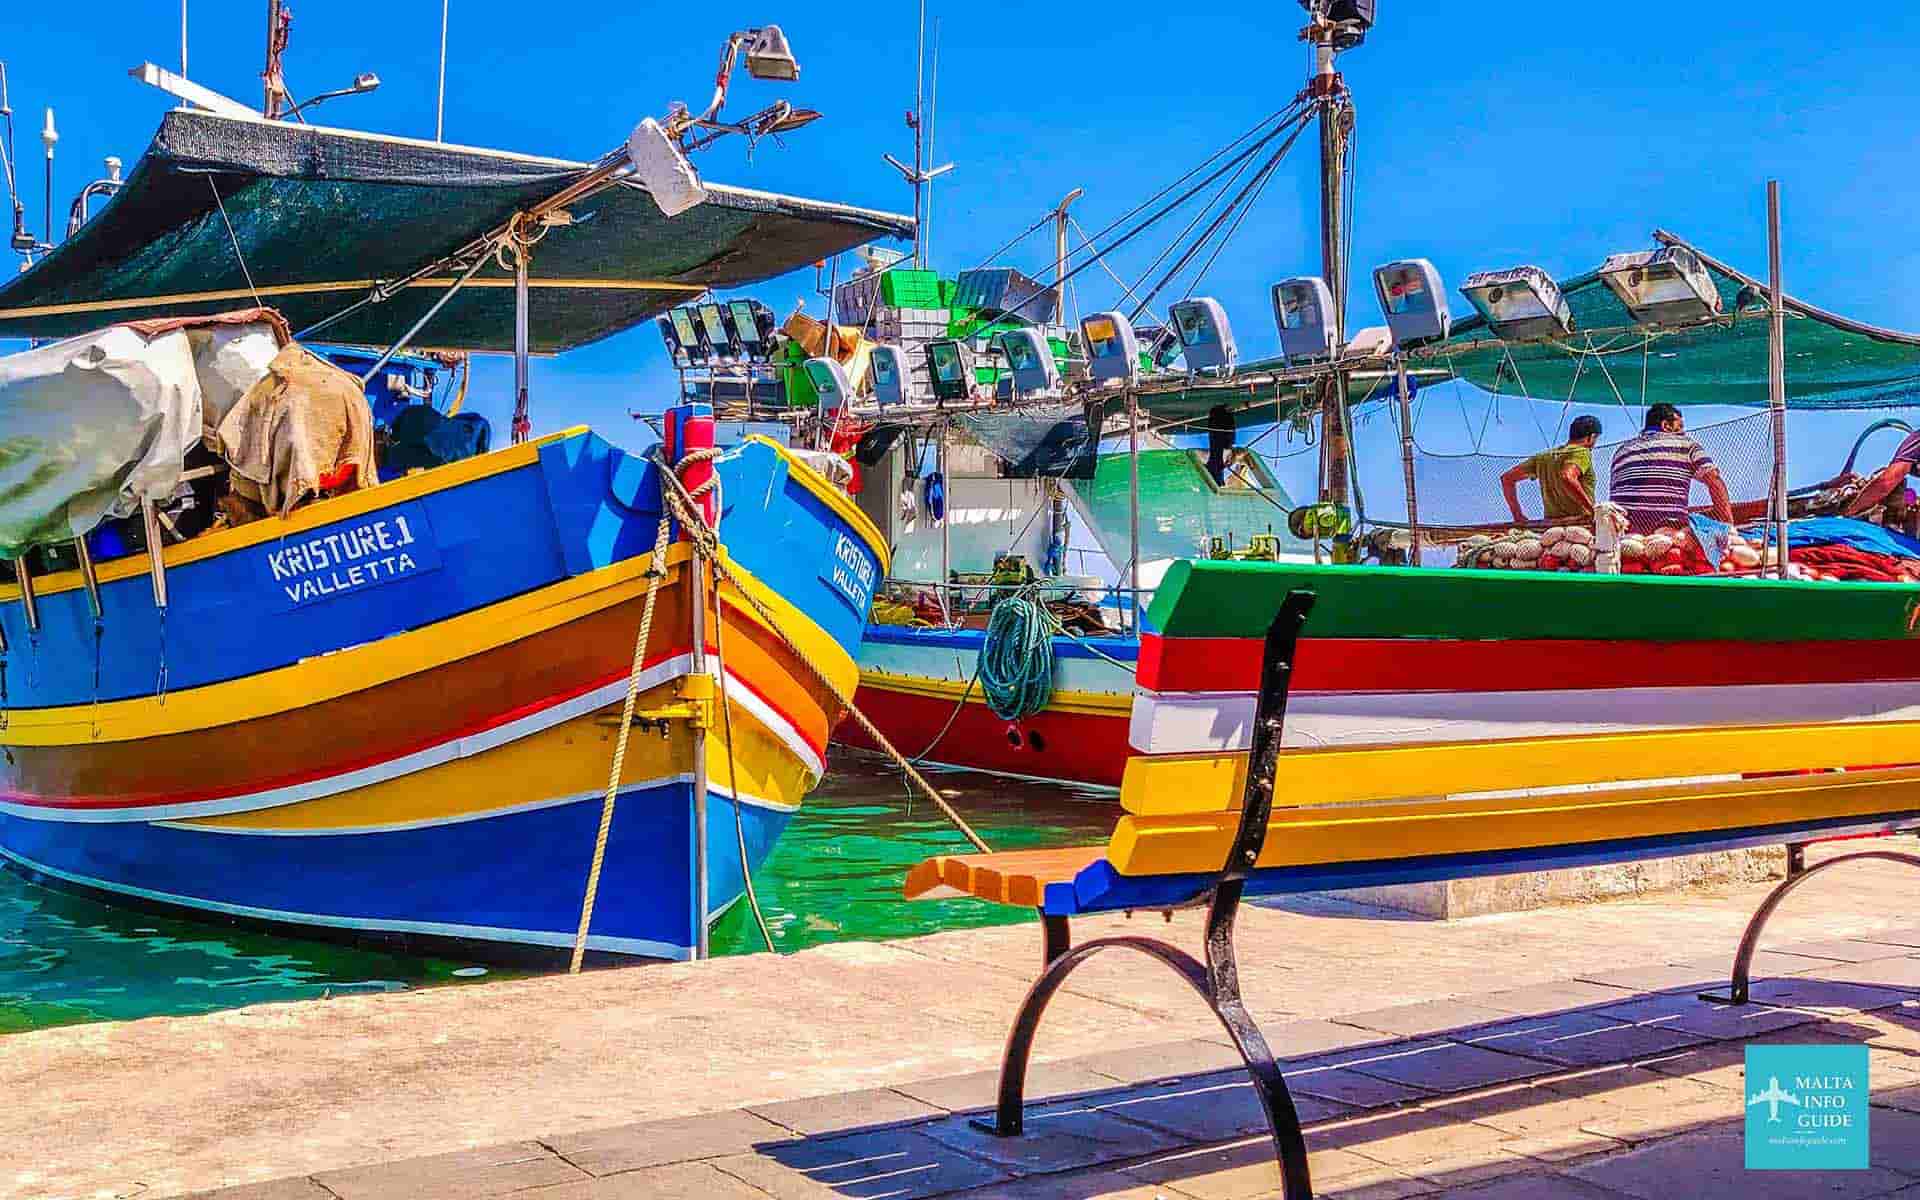 Beautiful colours popping from the Luzzu boat and bench in front of the sea at Marsaxlokk Malta.